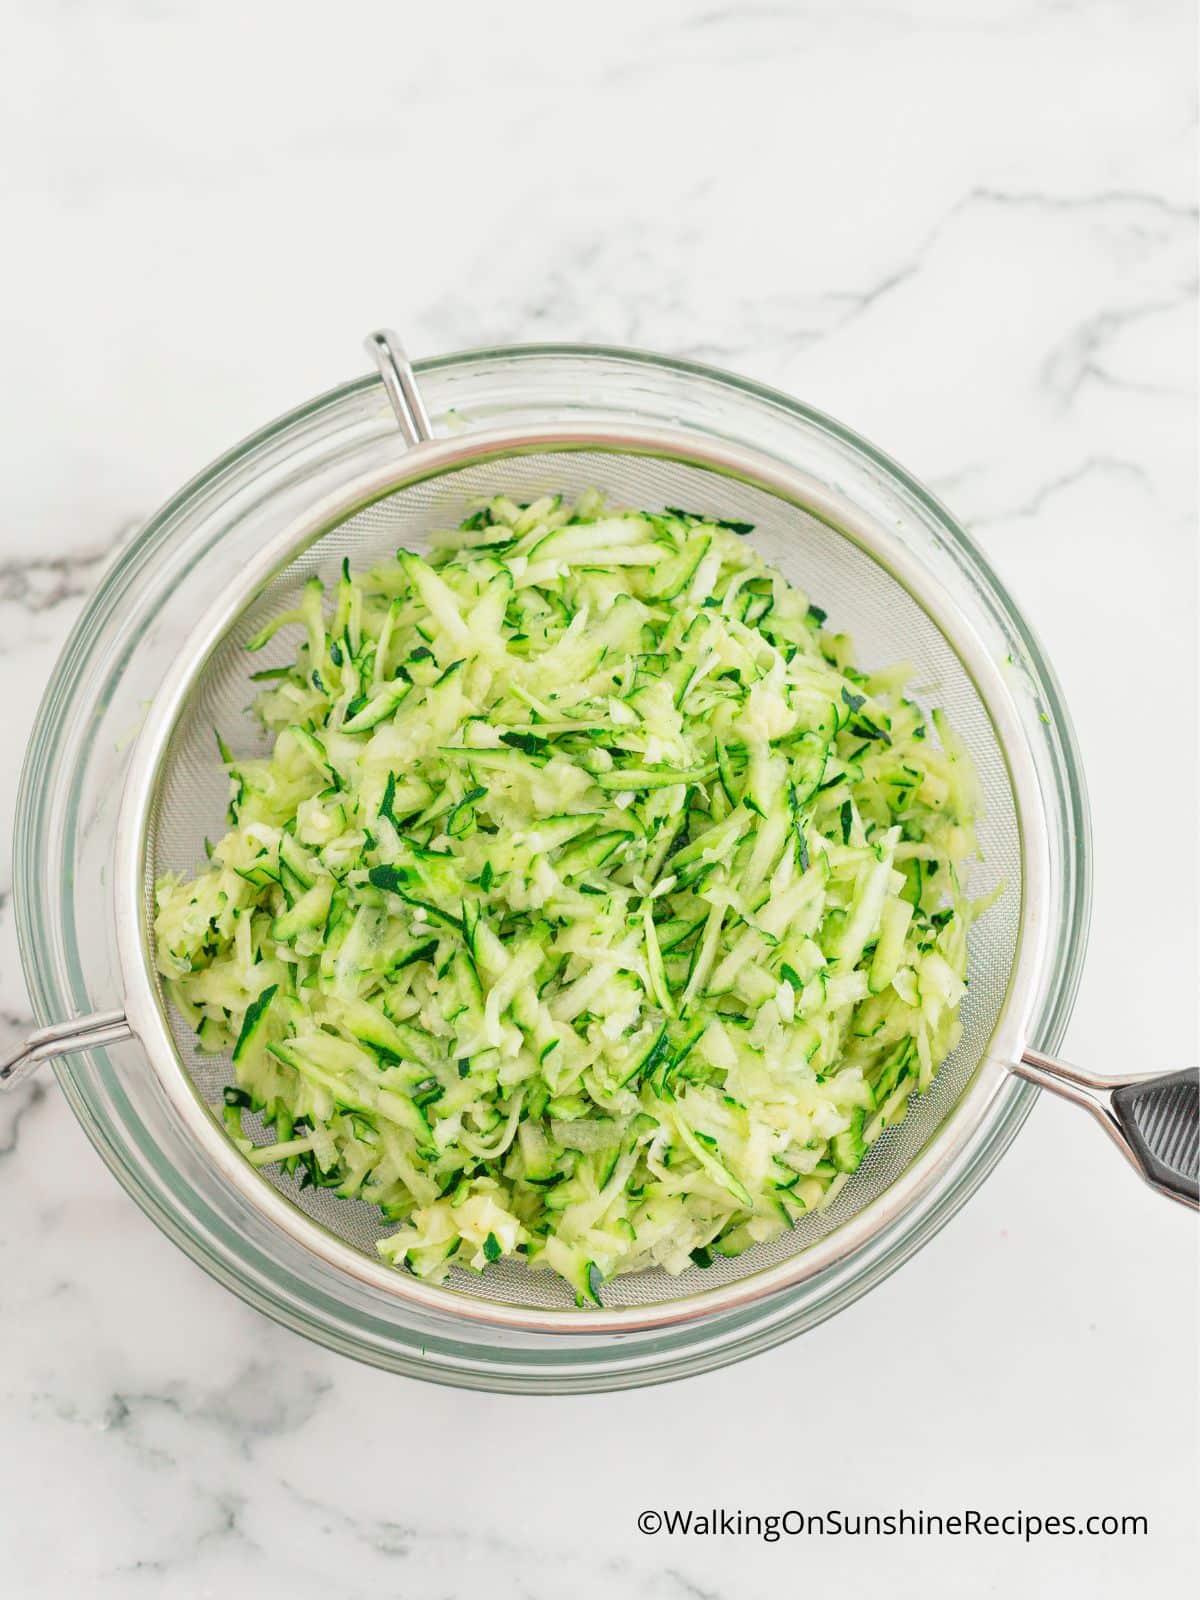 grated zucchini in sieve over glass bowl.